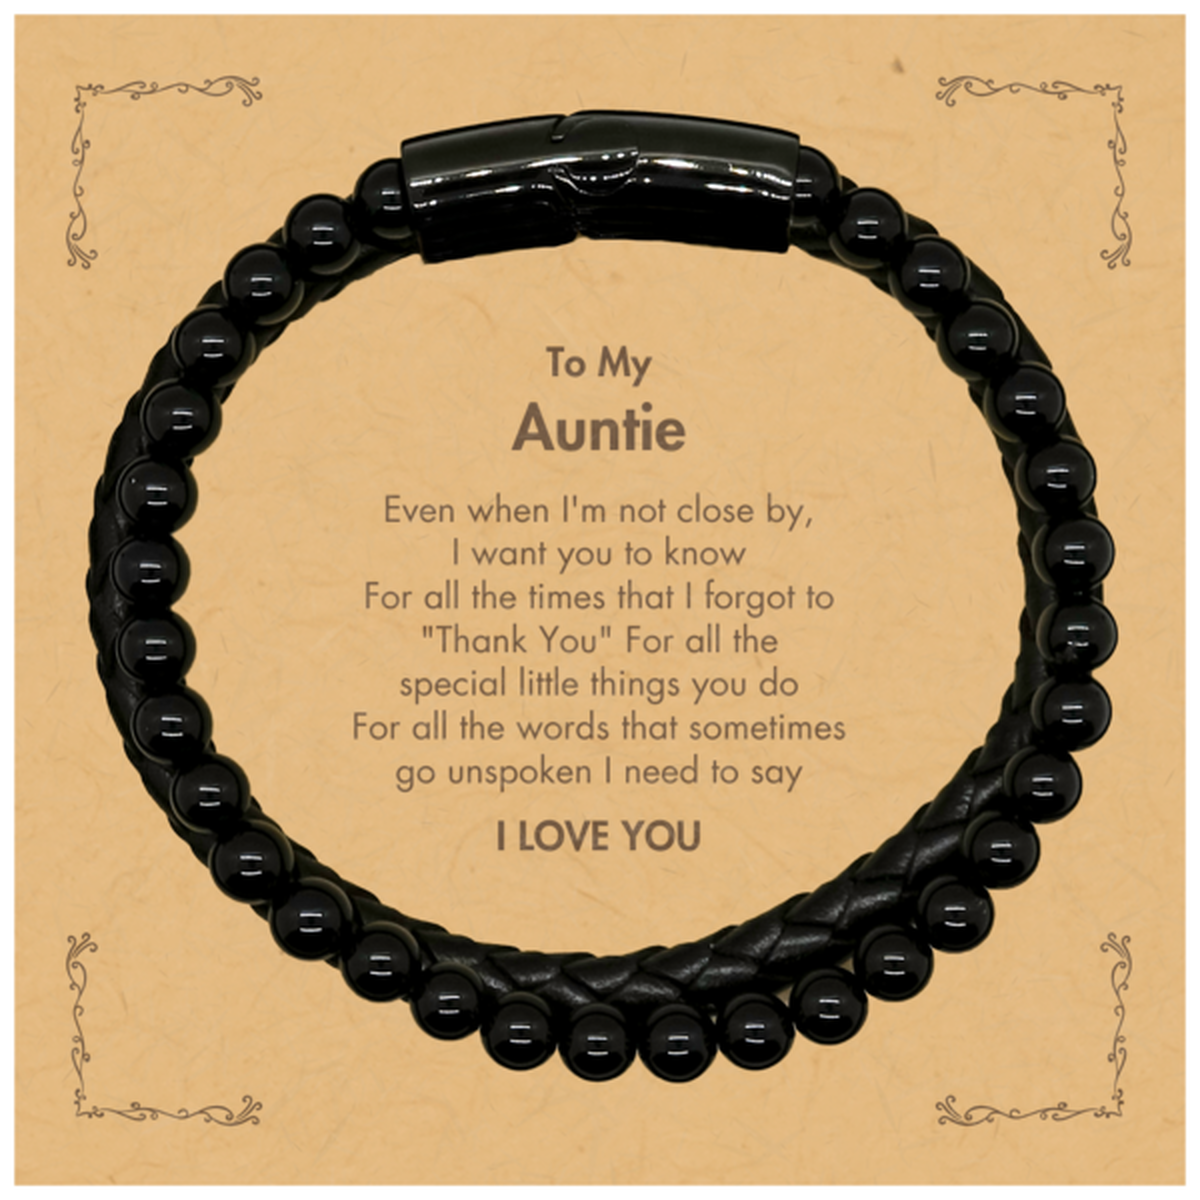 Thank You Gifts for Auntie, Keepsake Stone Leather Bracelets Gifts for Auntie Birthday Mother's day Father's Day Auntie For all the words That sometimes go unspoken I need to say I LOVE YOU